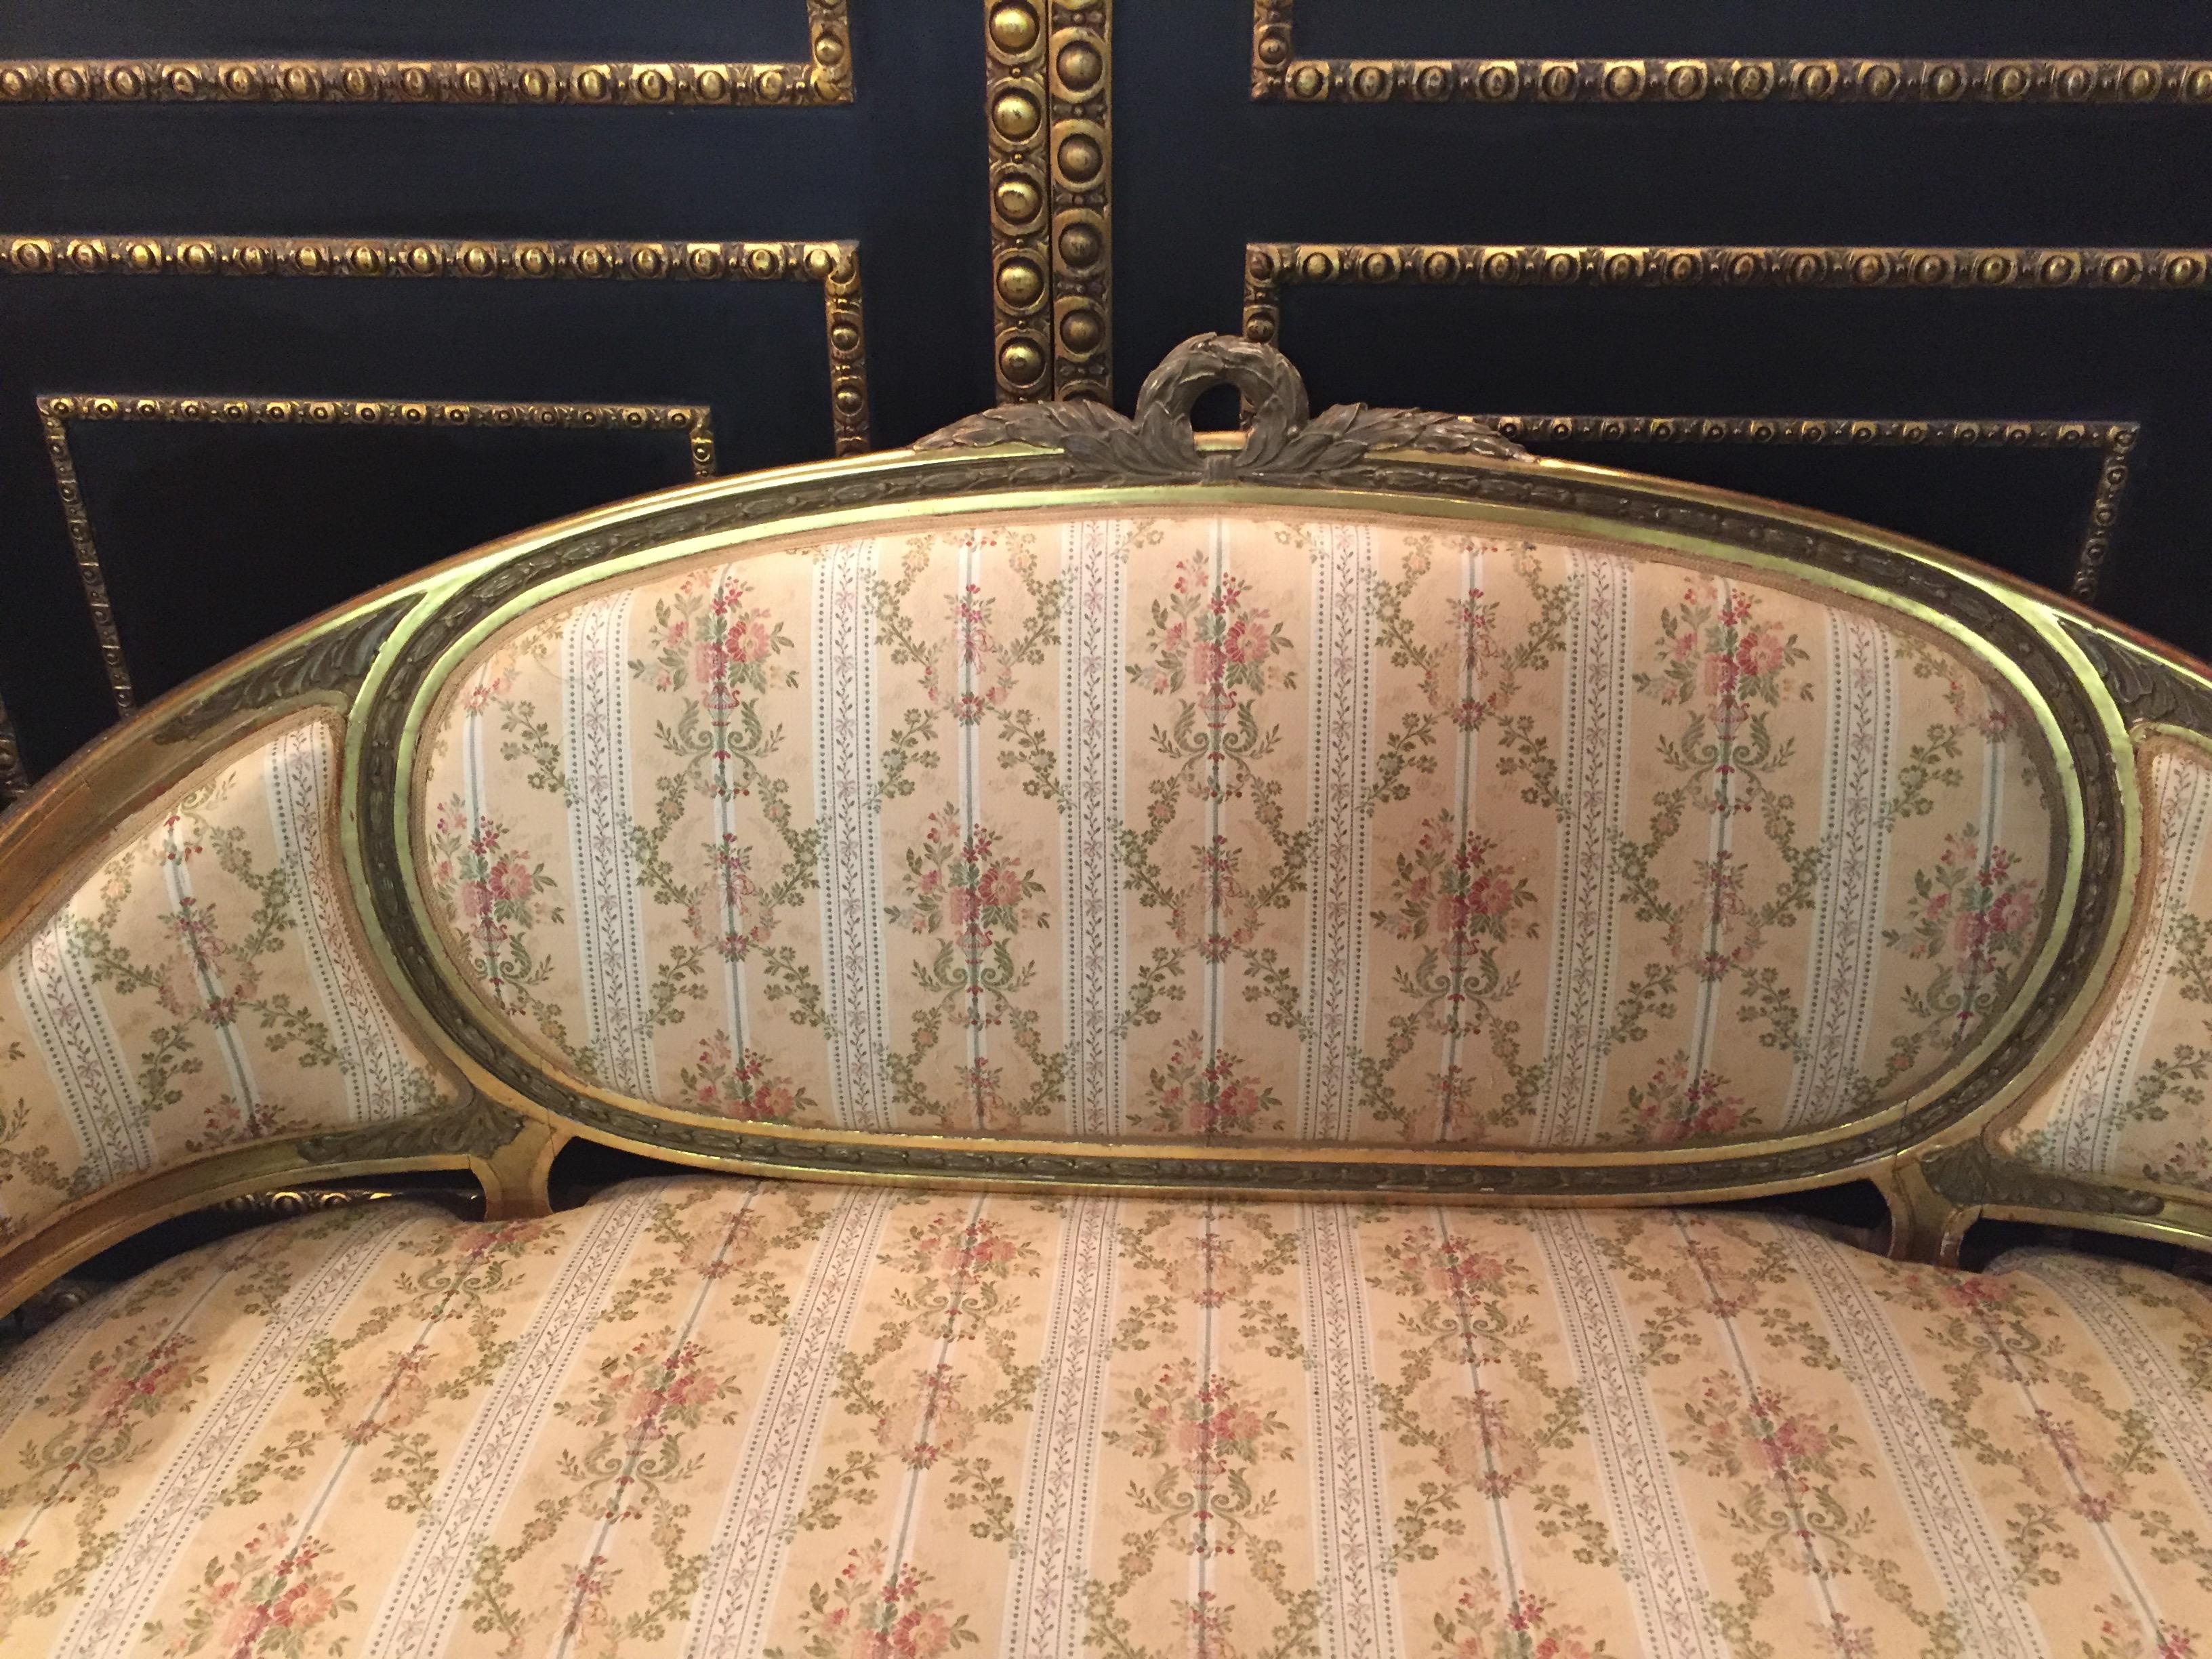 Hand-Carved 19th Century Sofa in Louis XVI Style, Solid Beech Wood Poliment Gilded